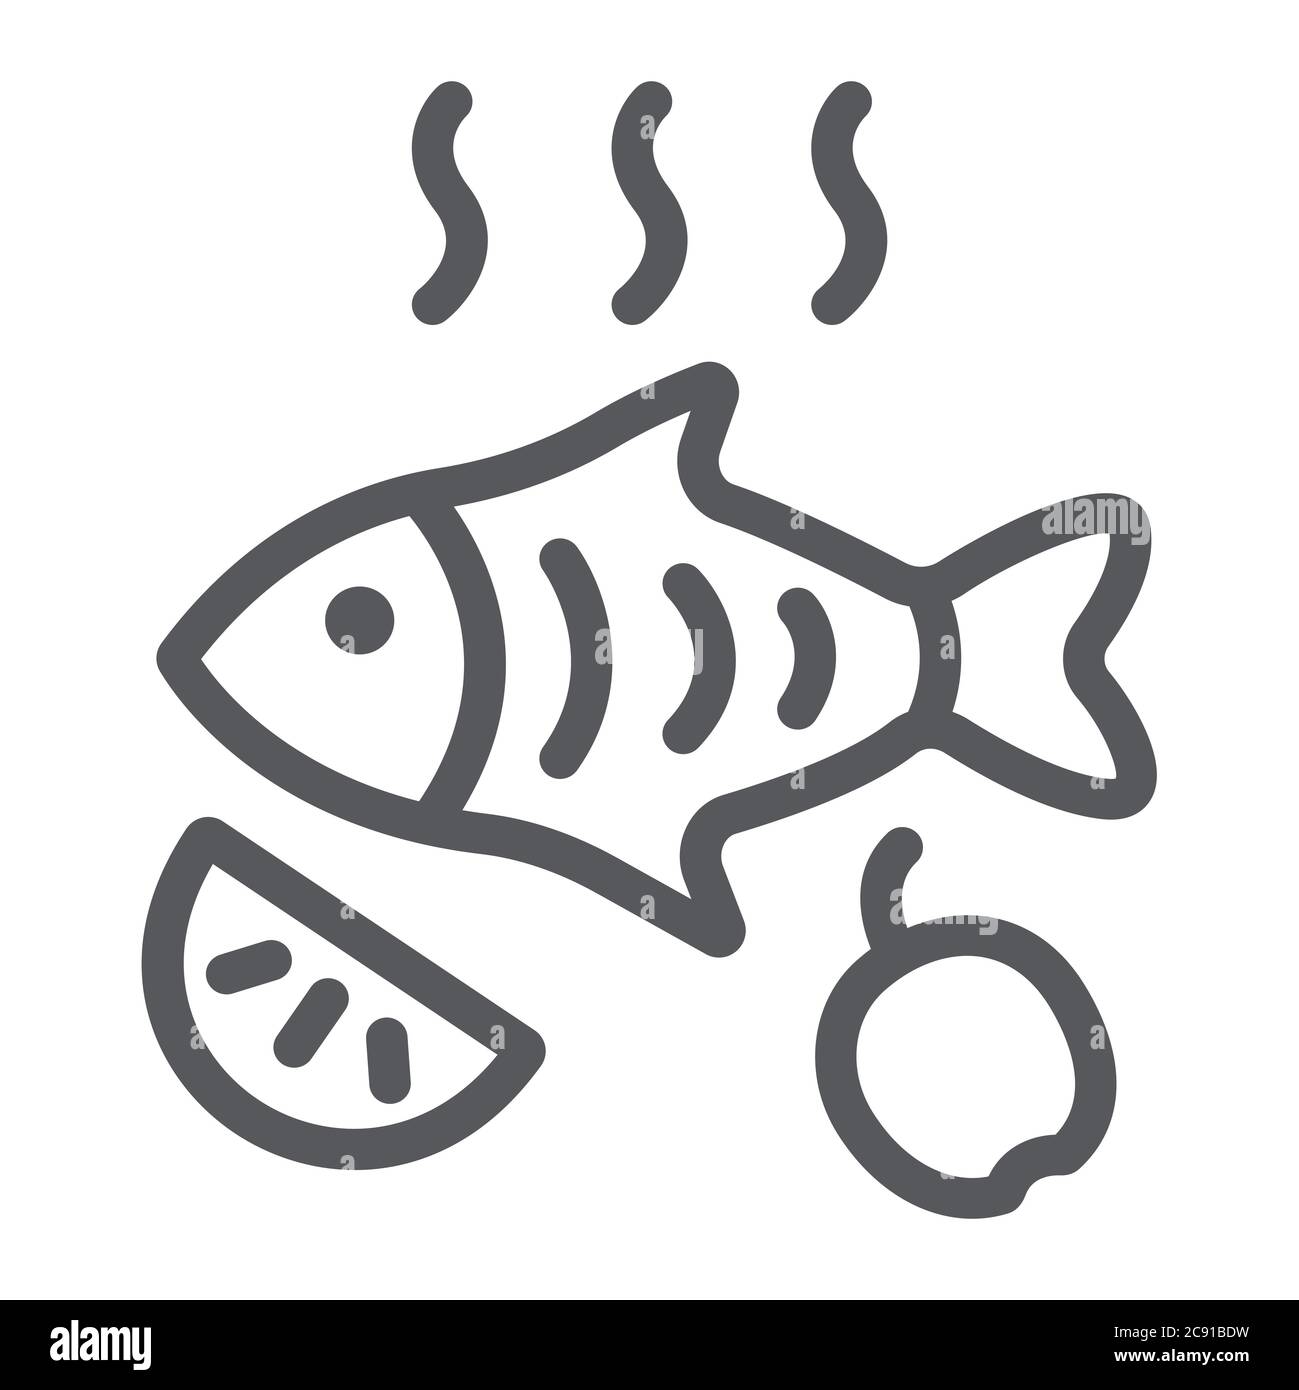 https://c8.alamy.com/comp/2C91BDW/fried-fish-line-icon-food-and-sea-grilled-fish-sign-vector-graphics-a-linear-pattern-on-a-white-background-2C91BDW.jpg